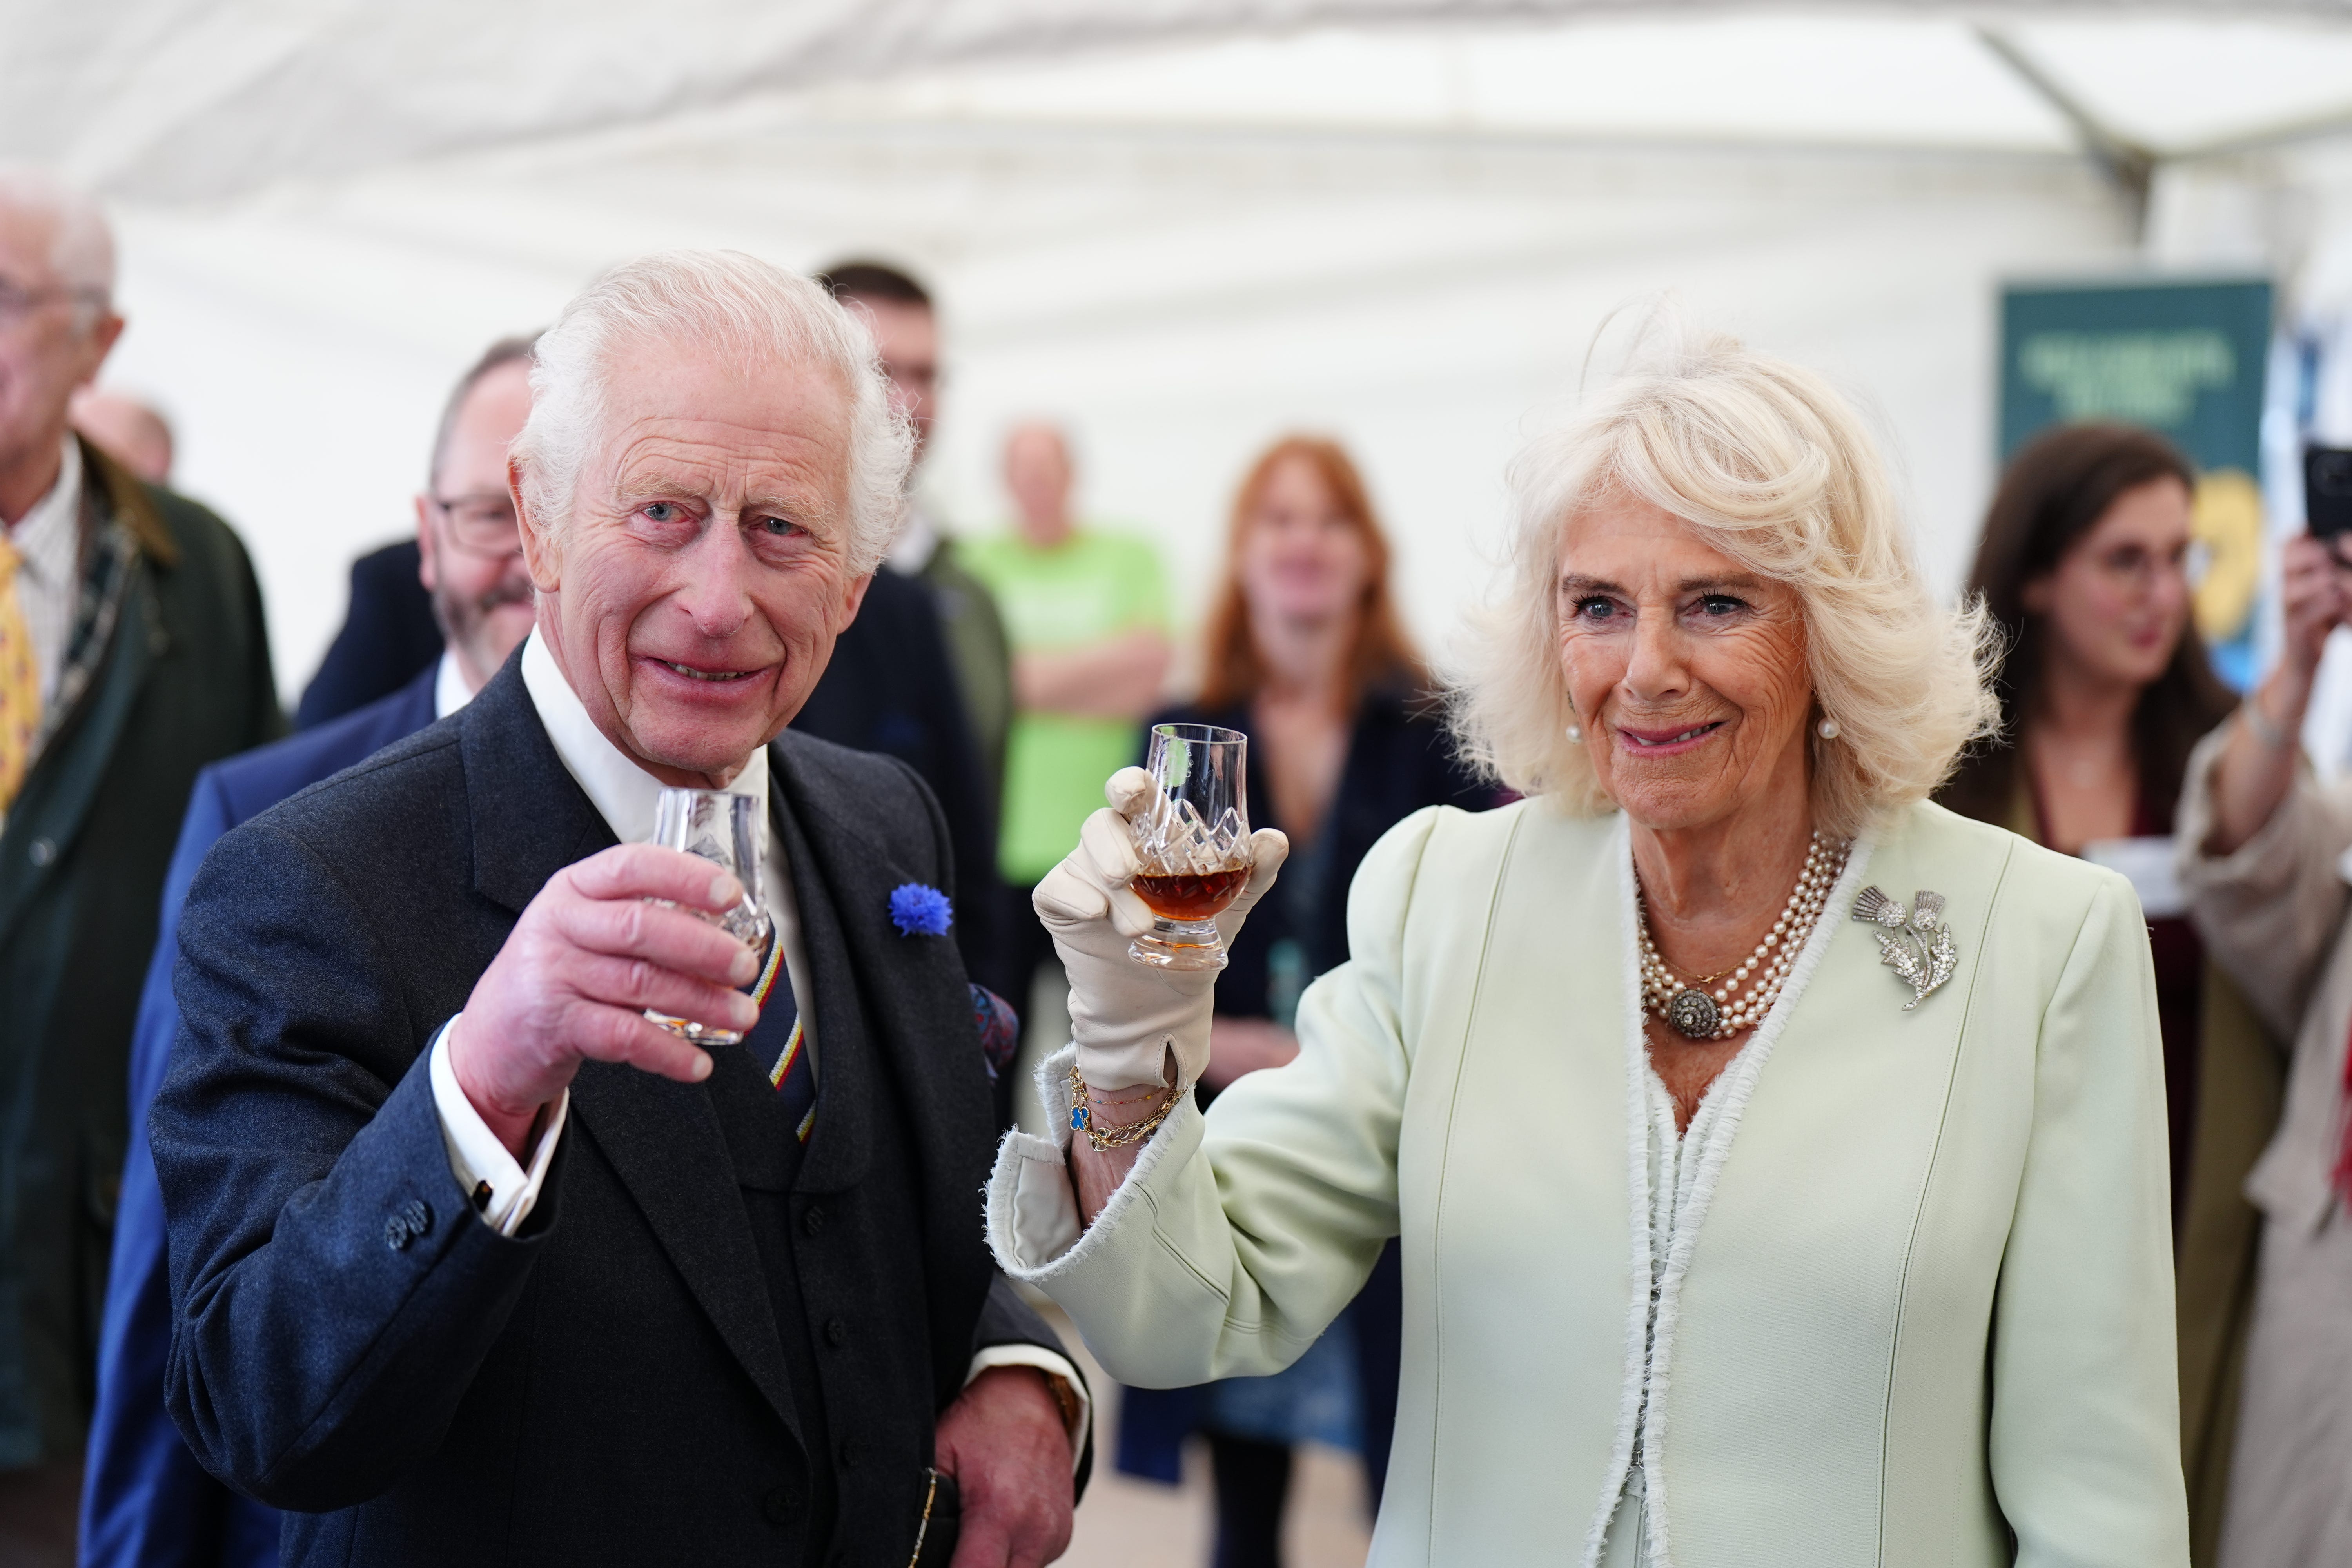 The King and Queen try a glass of whisky as they attend a celebration at Edinburgh Castle to mark the 900th anniversary of the City of Edinburgh (Jane Barlow/PA)